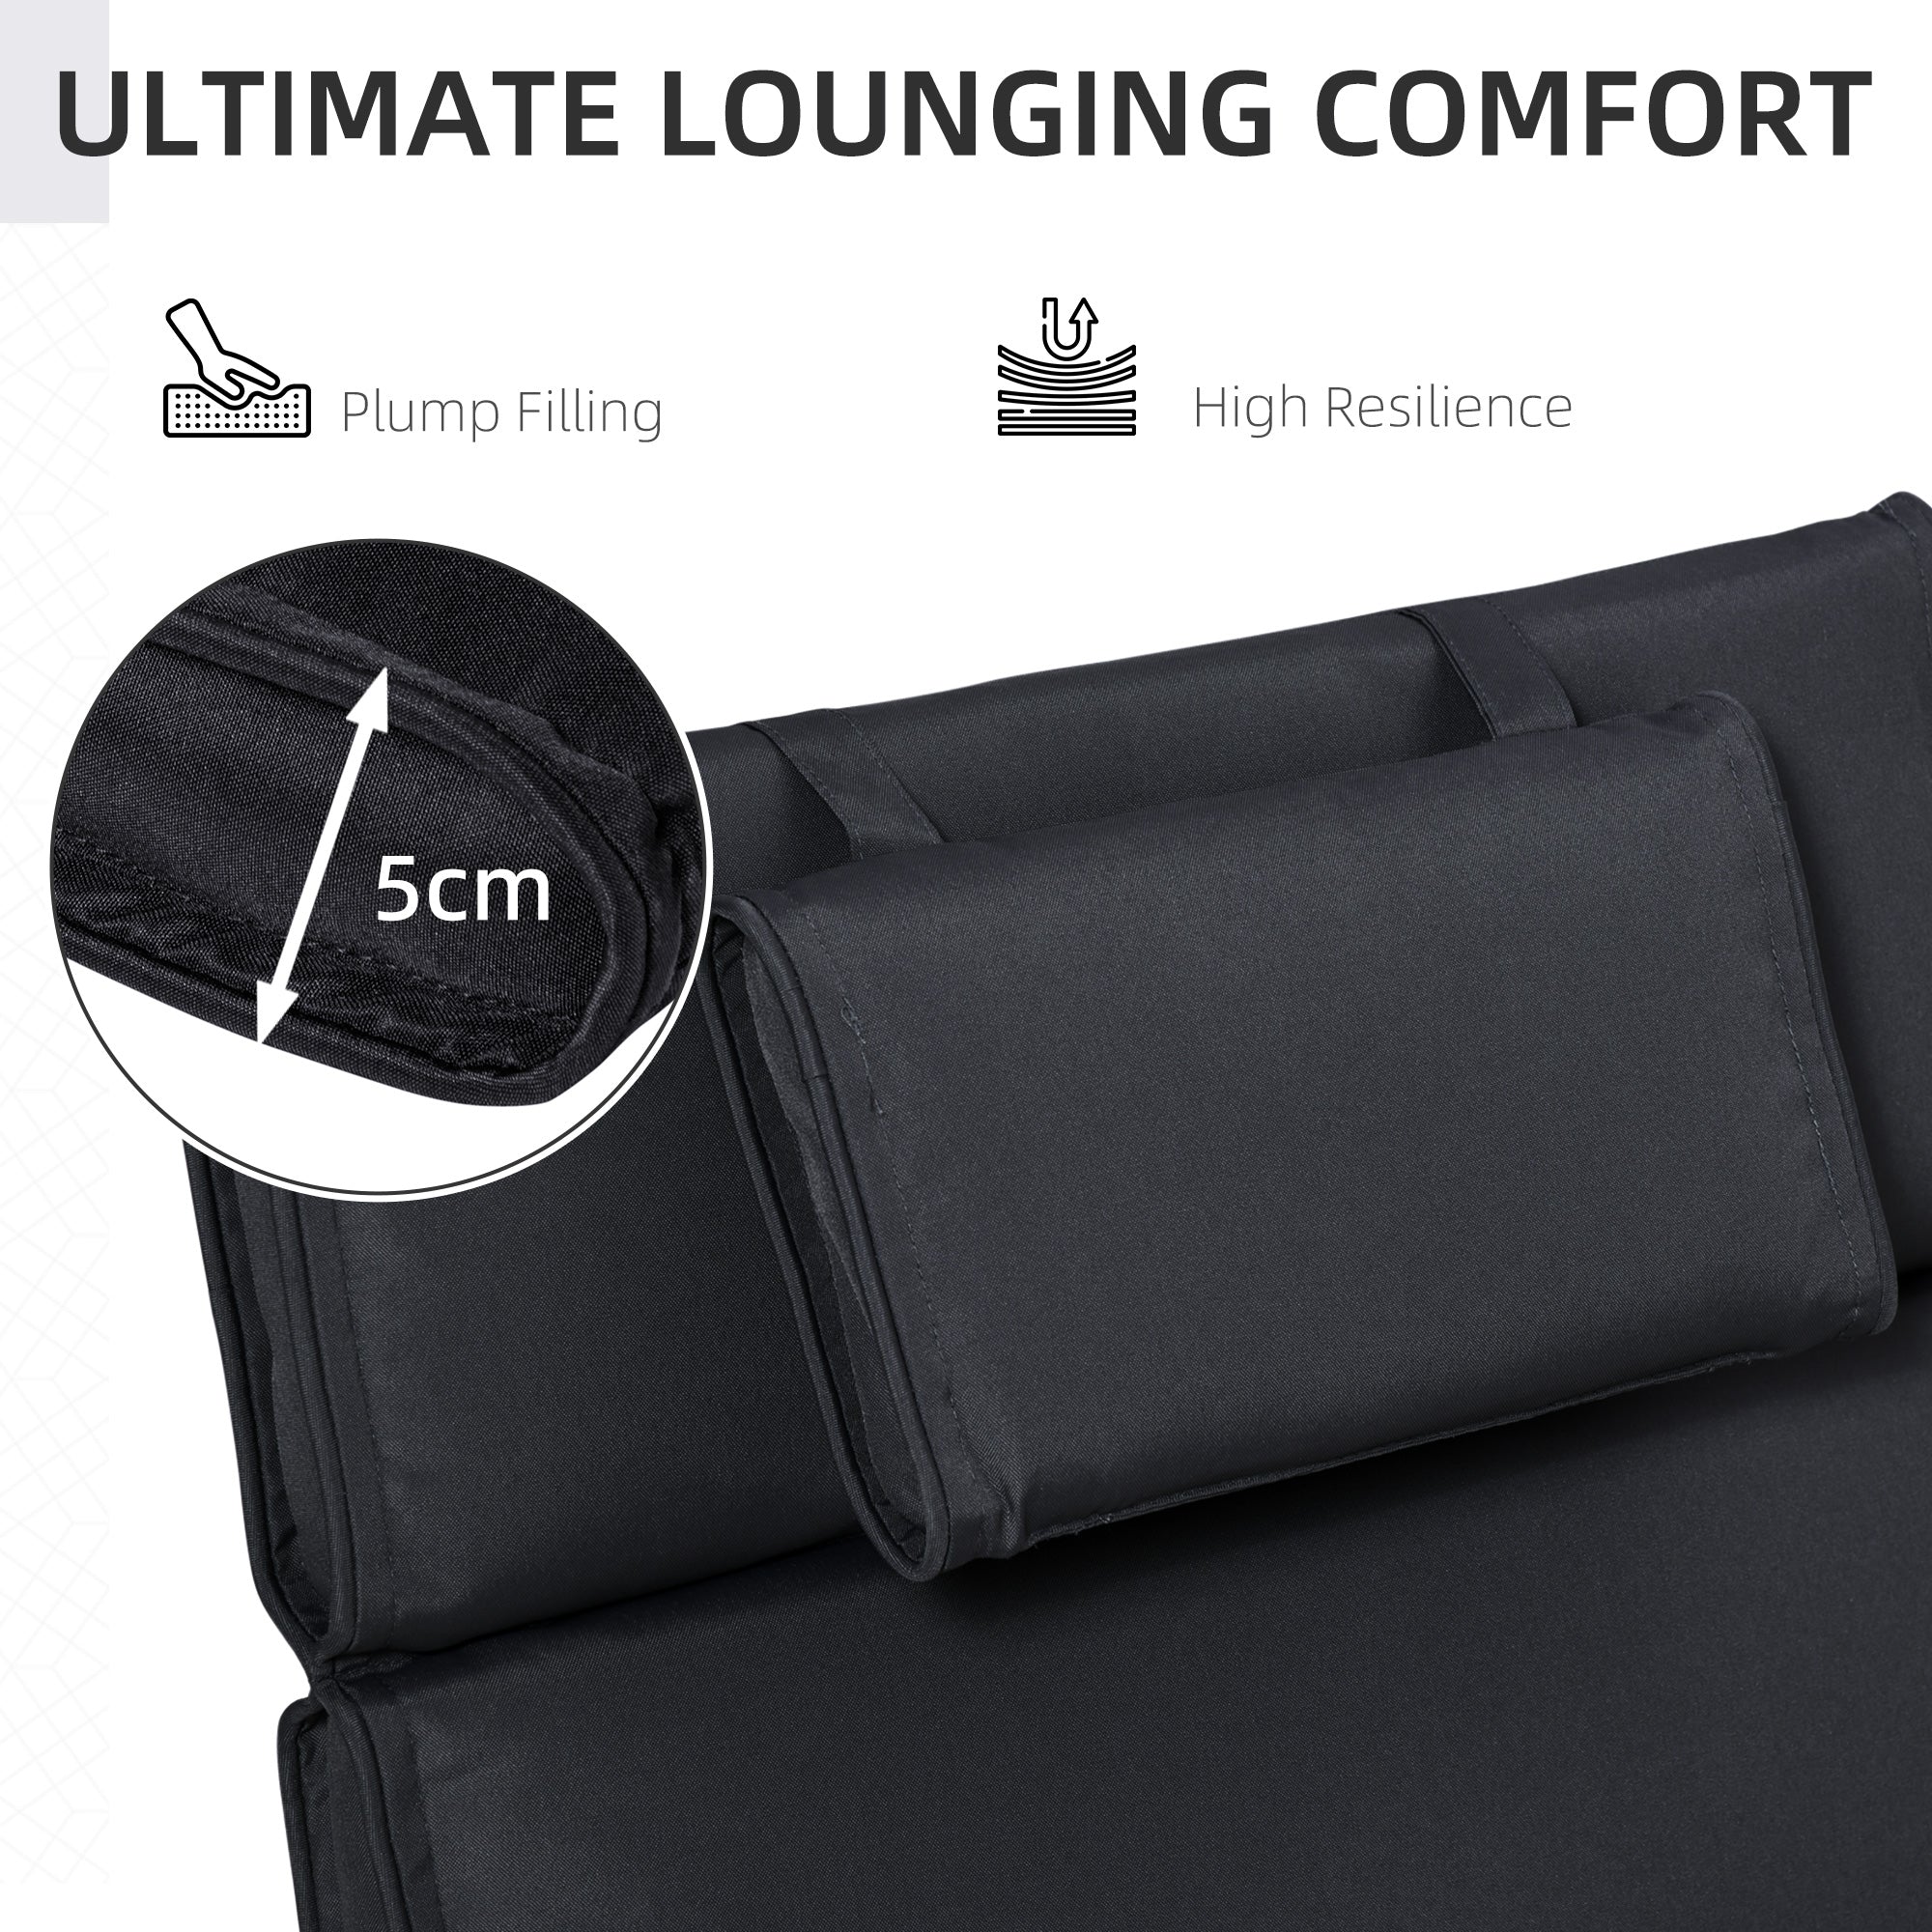 Garden Sun Lounger Cushion Replacement Thick Sunbed Reclining Chair Relaxer Pad with Pillow - Black-3